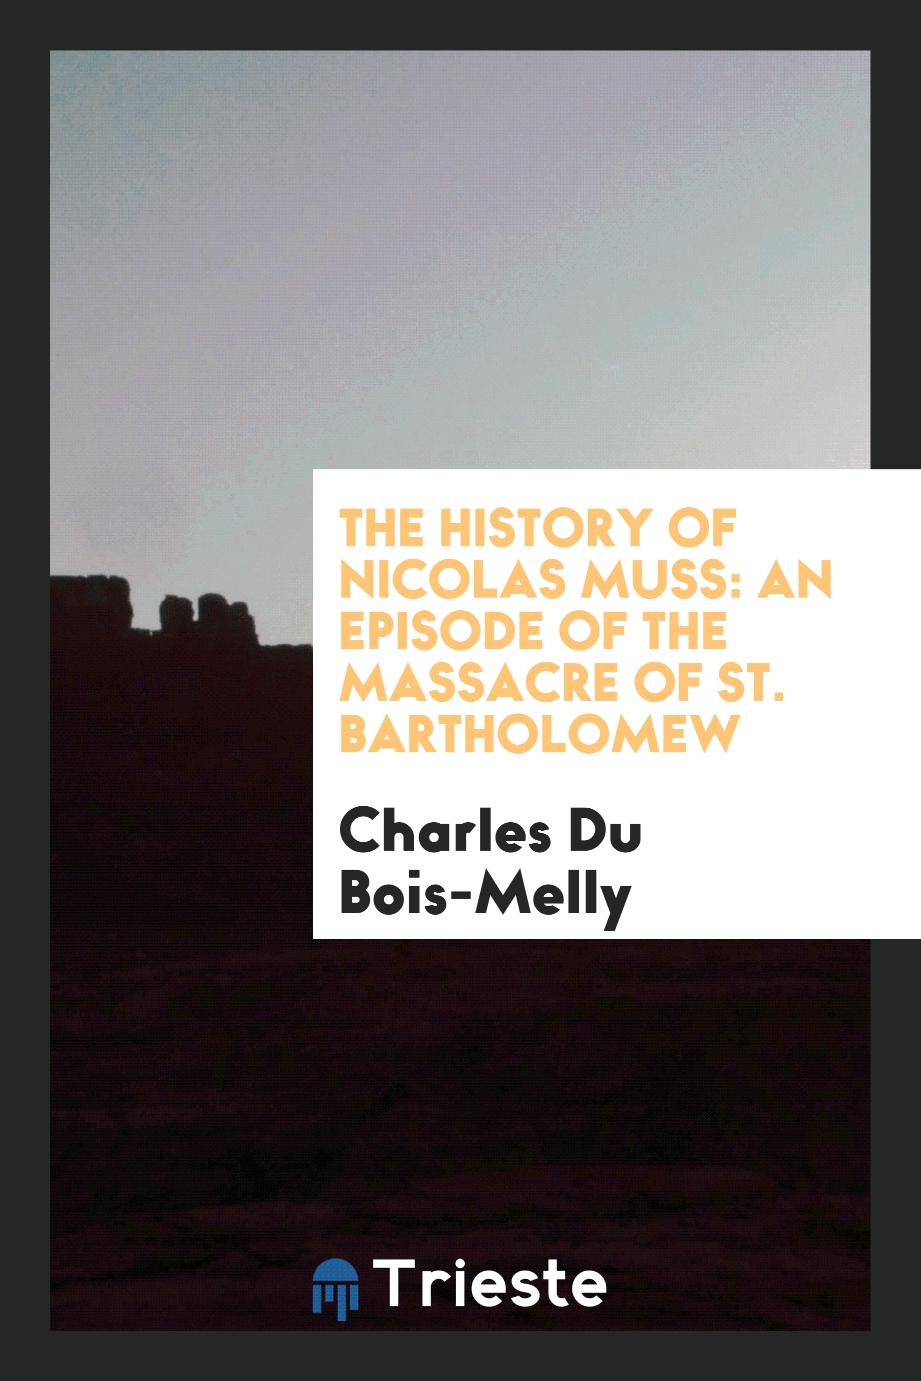 The History of Nicolas Muss: An Episode of the Massacre of St. Bartholomew